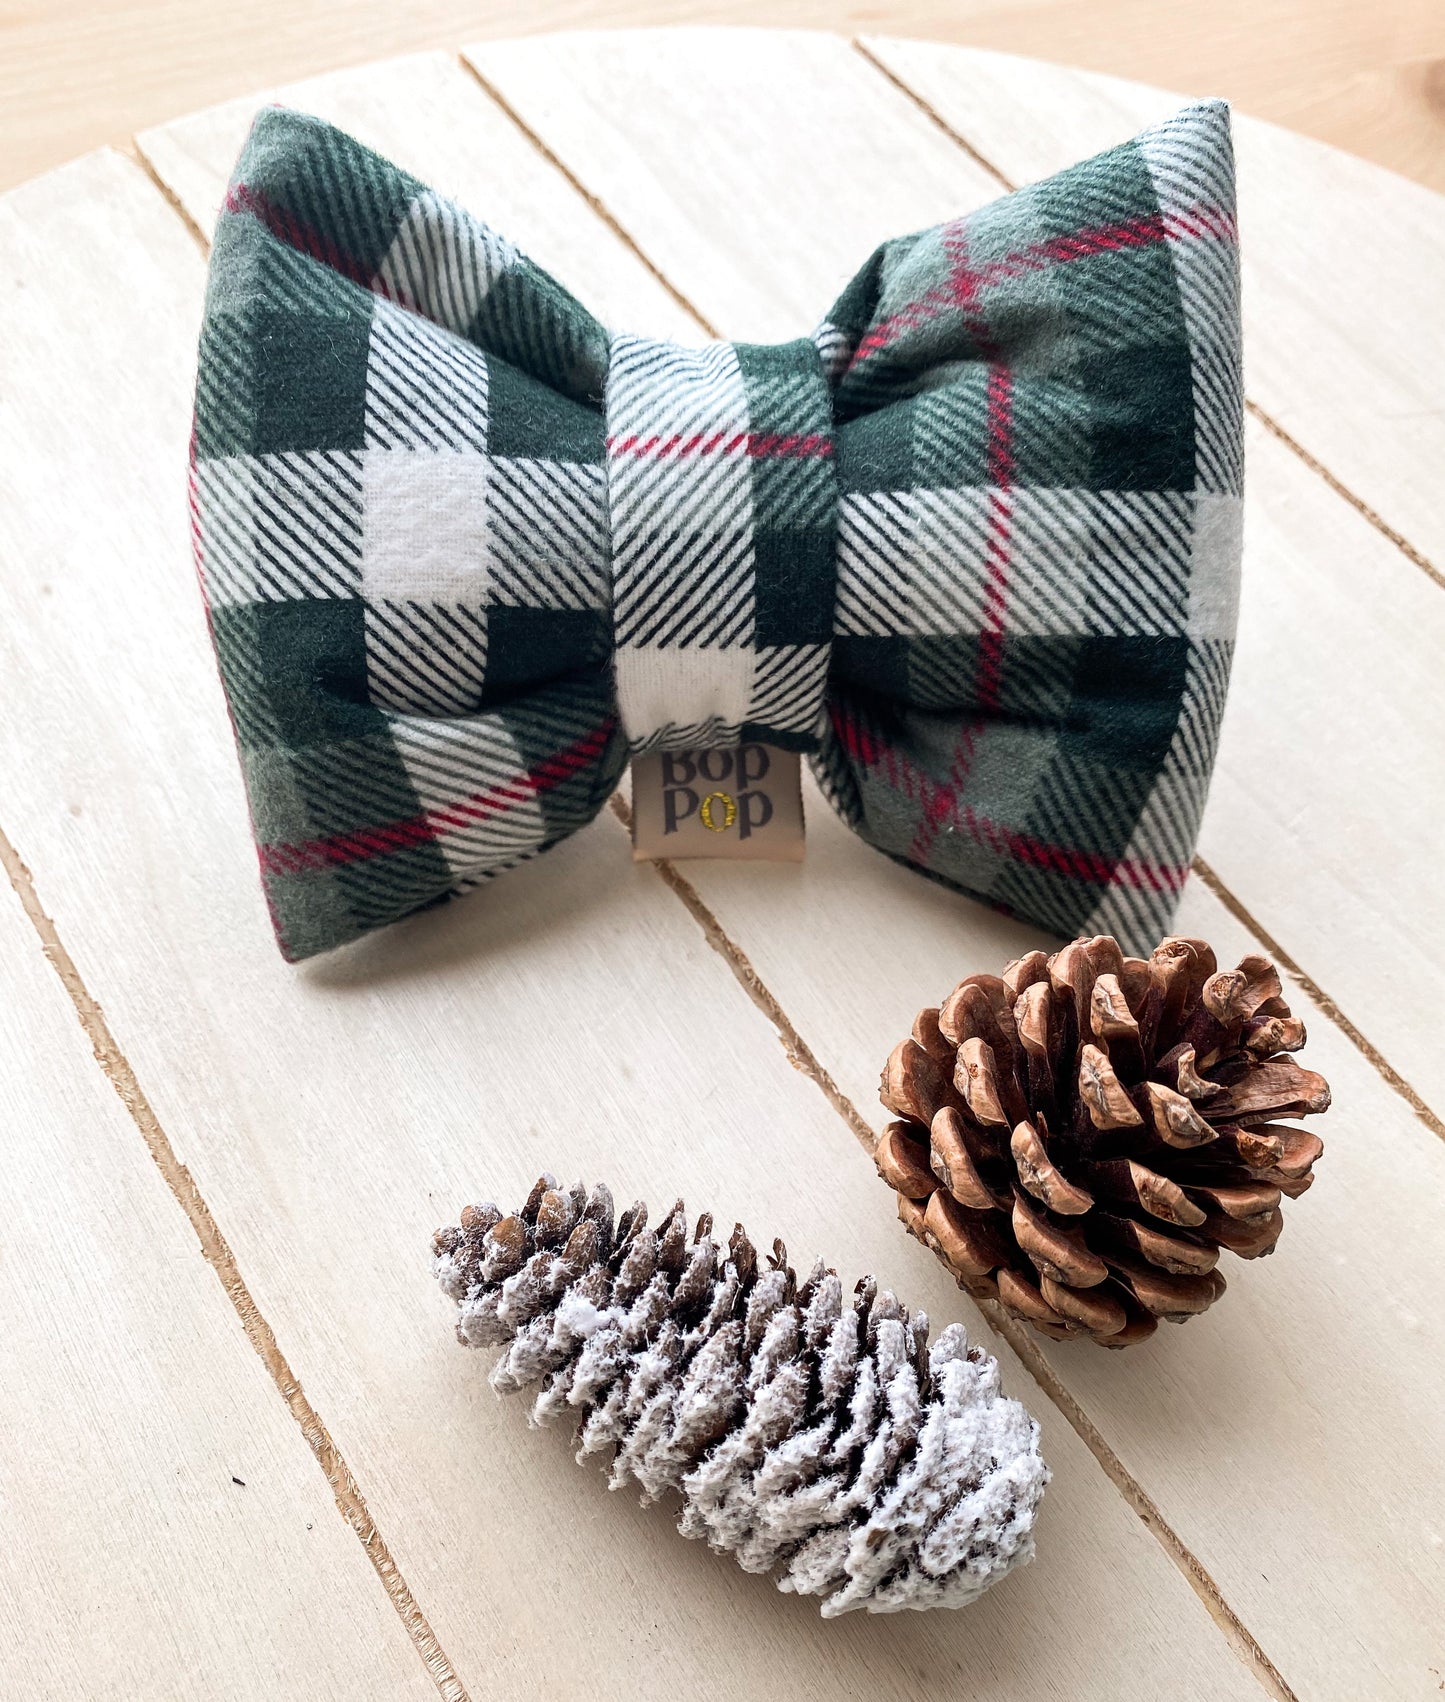 Evergreen Plaid XXL Big Bow tie for pets dog cats pet apparel cabin style Christmas green bop pop pets